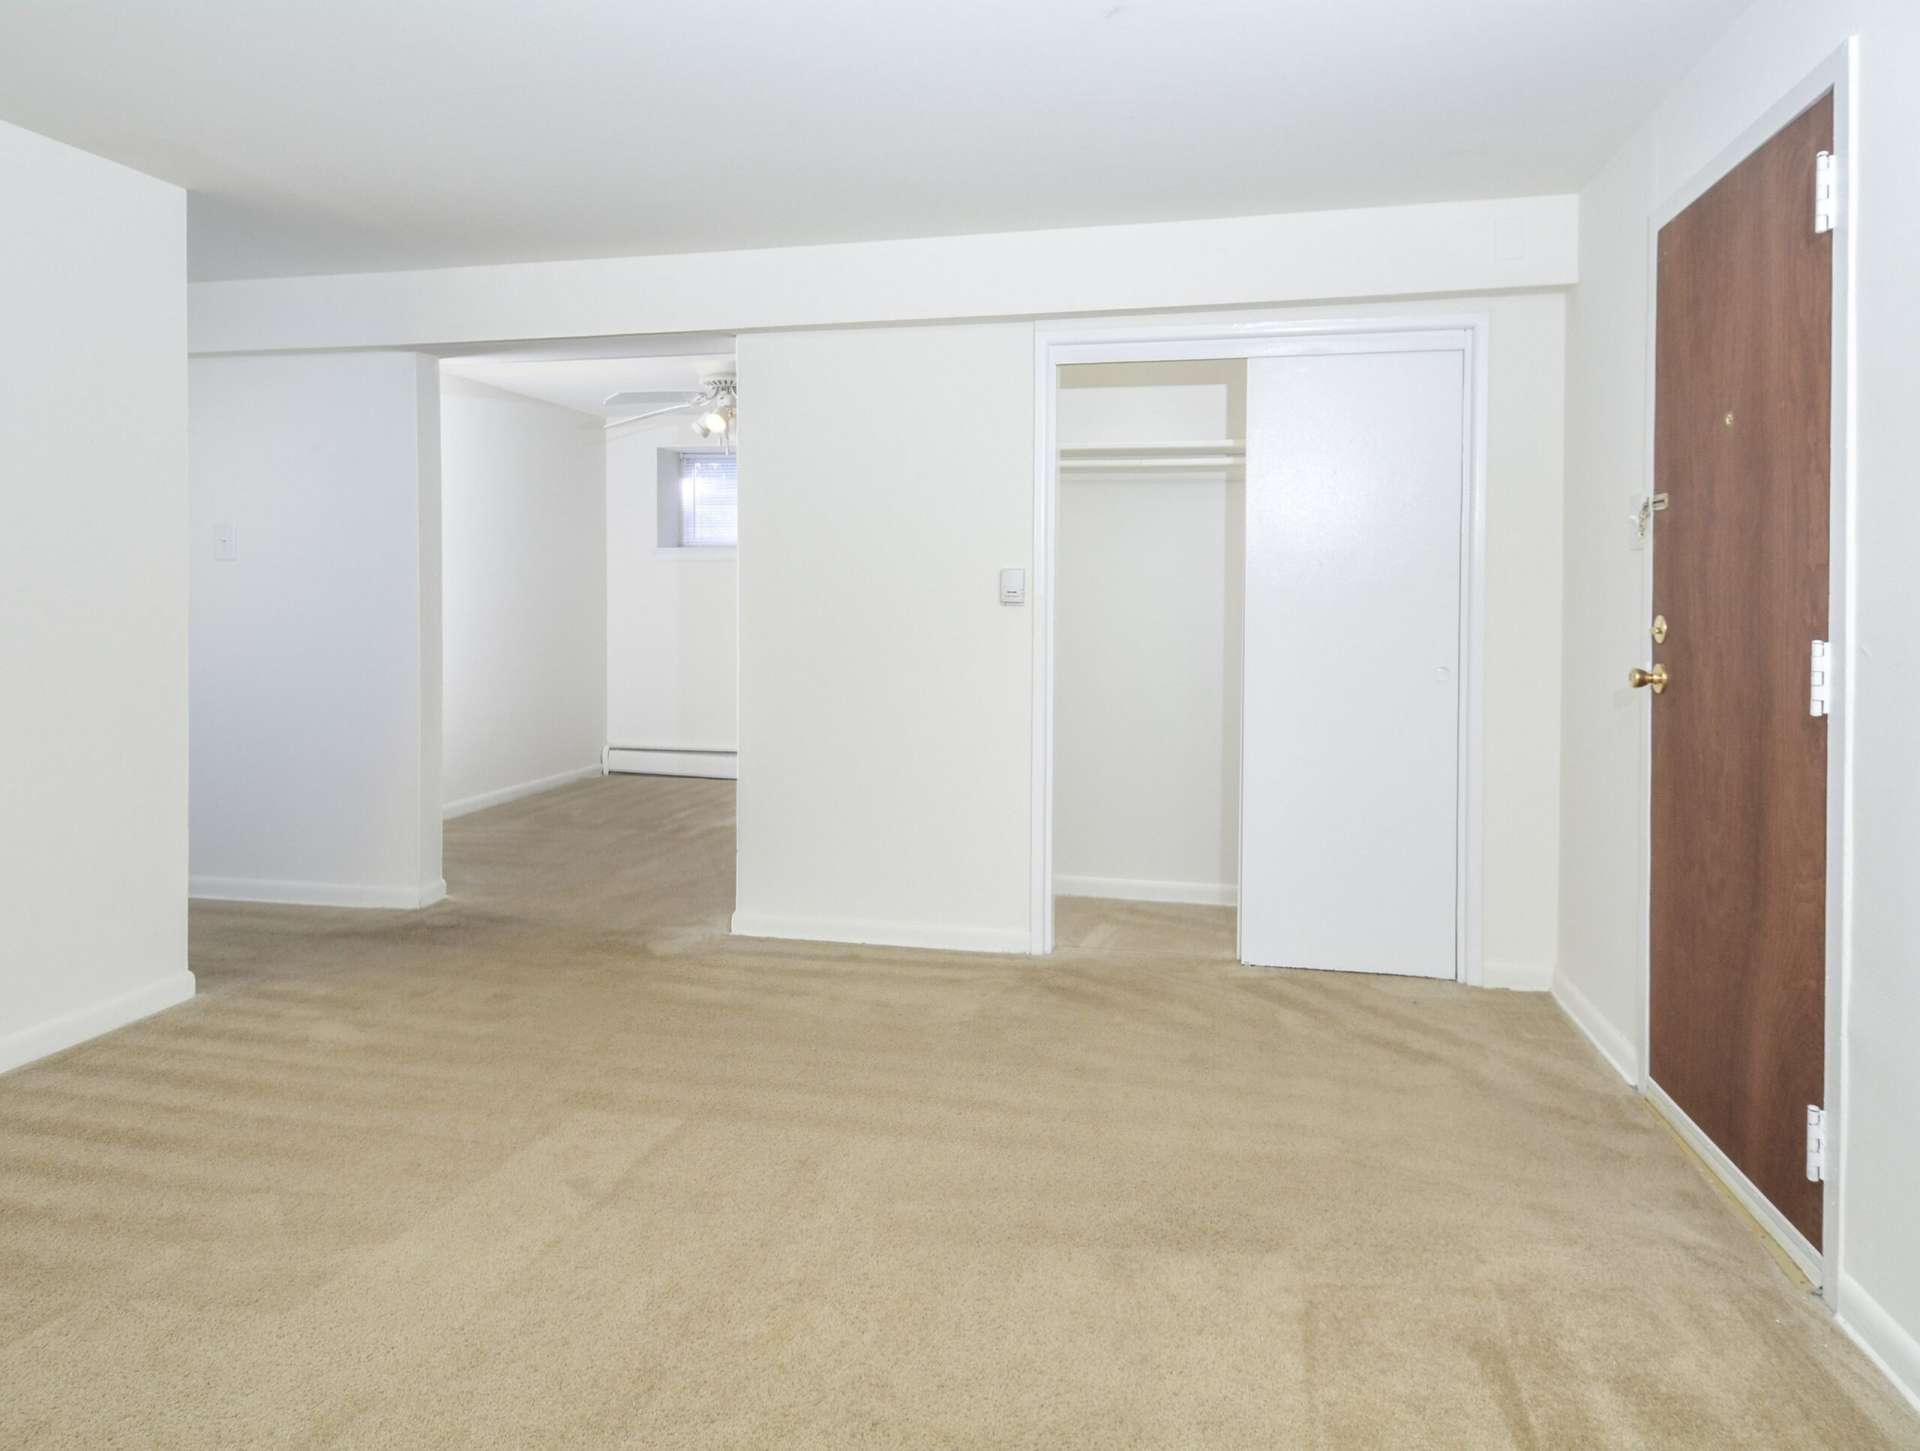 Living room space with beige carpets and sliding closet doors.